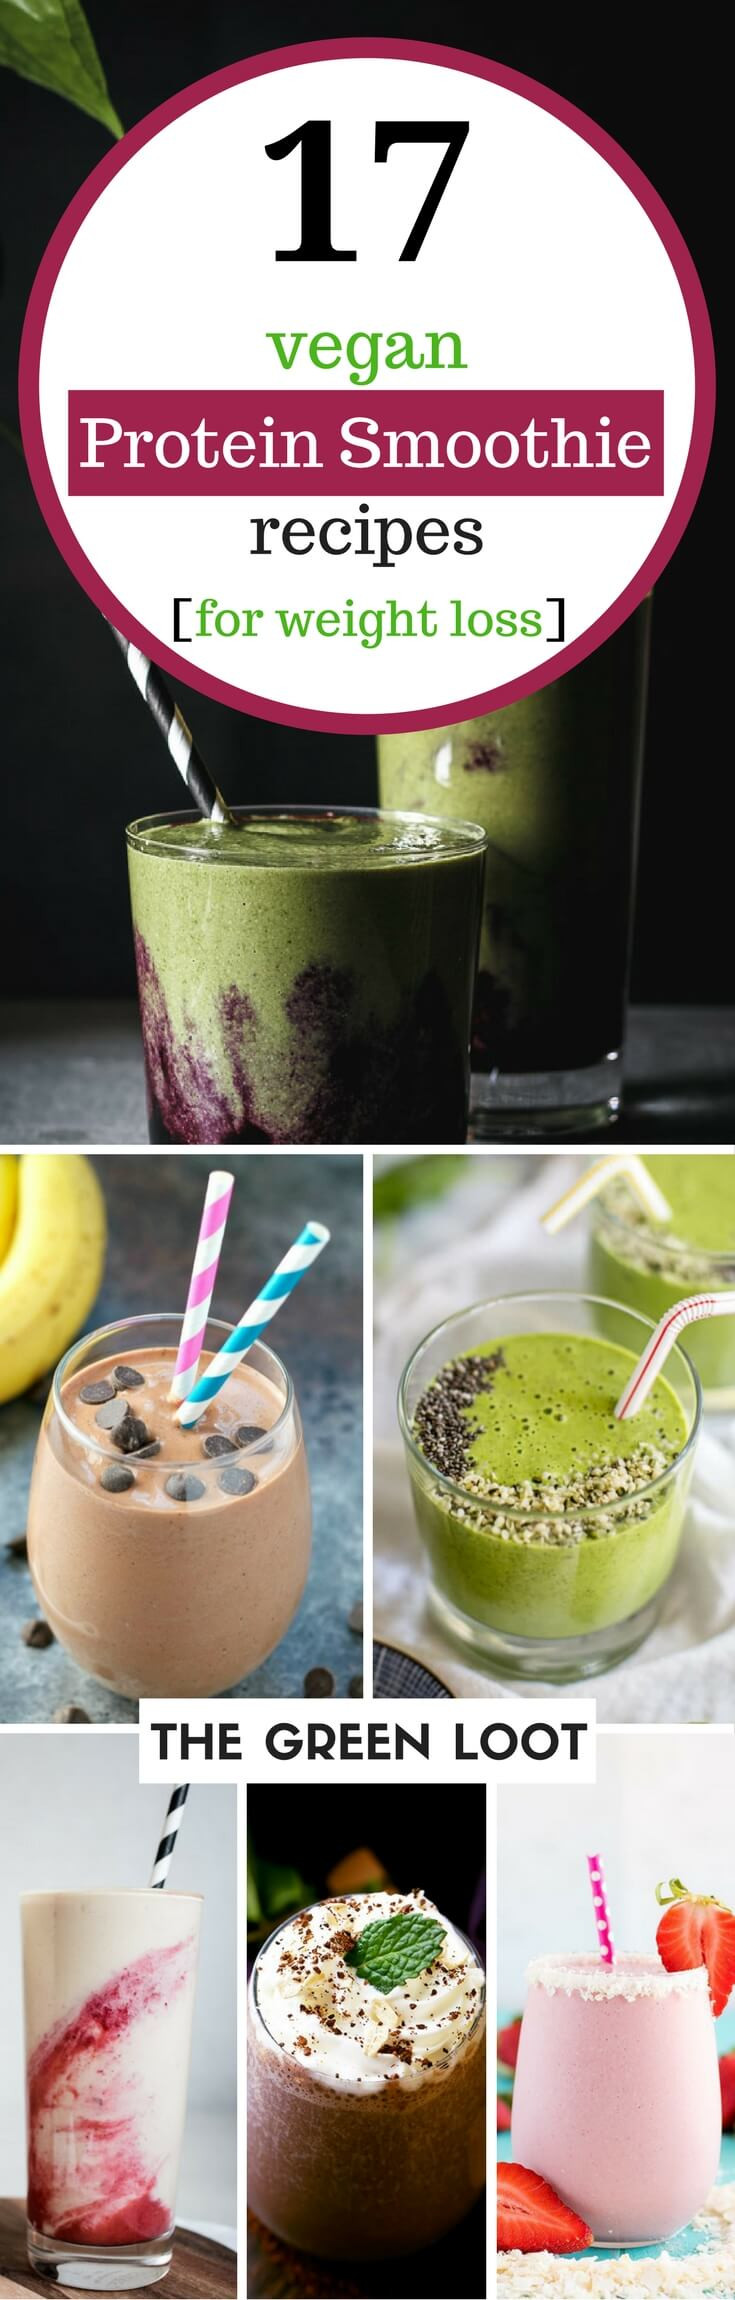 Protein Shakes Recipes For Weight Loss
 17 Tasty Vegan Protein Smoothie Recipes for Weight Loss